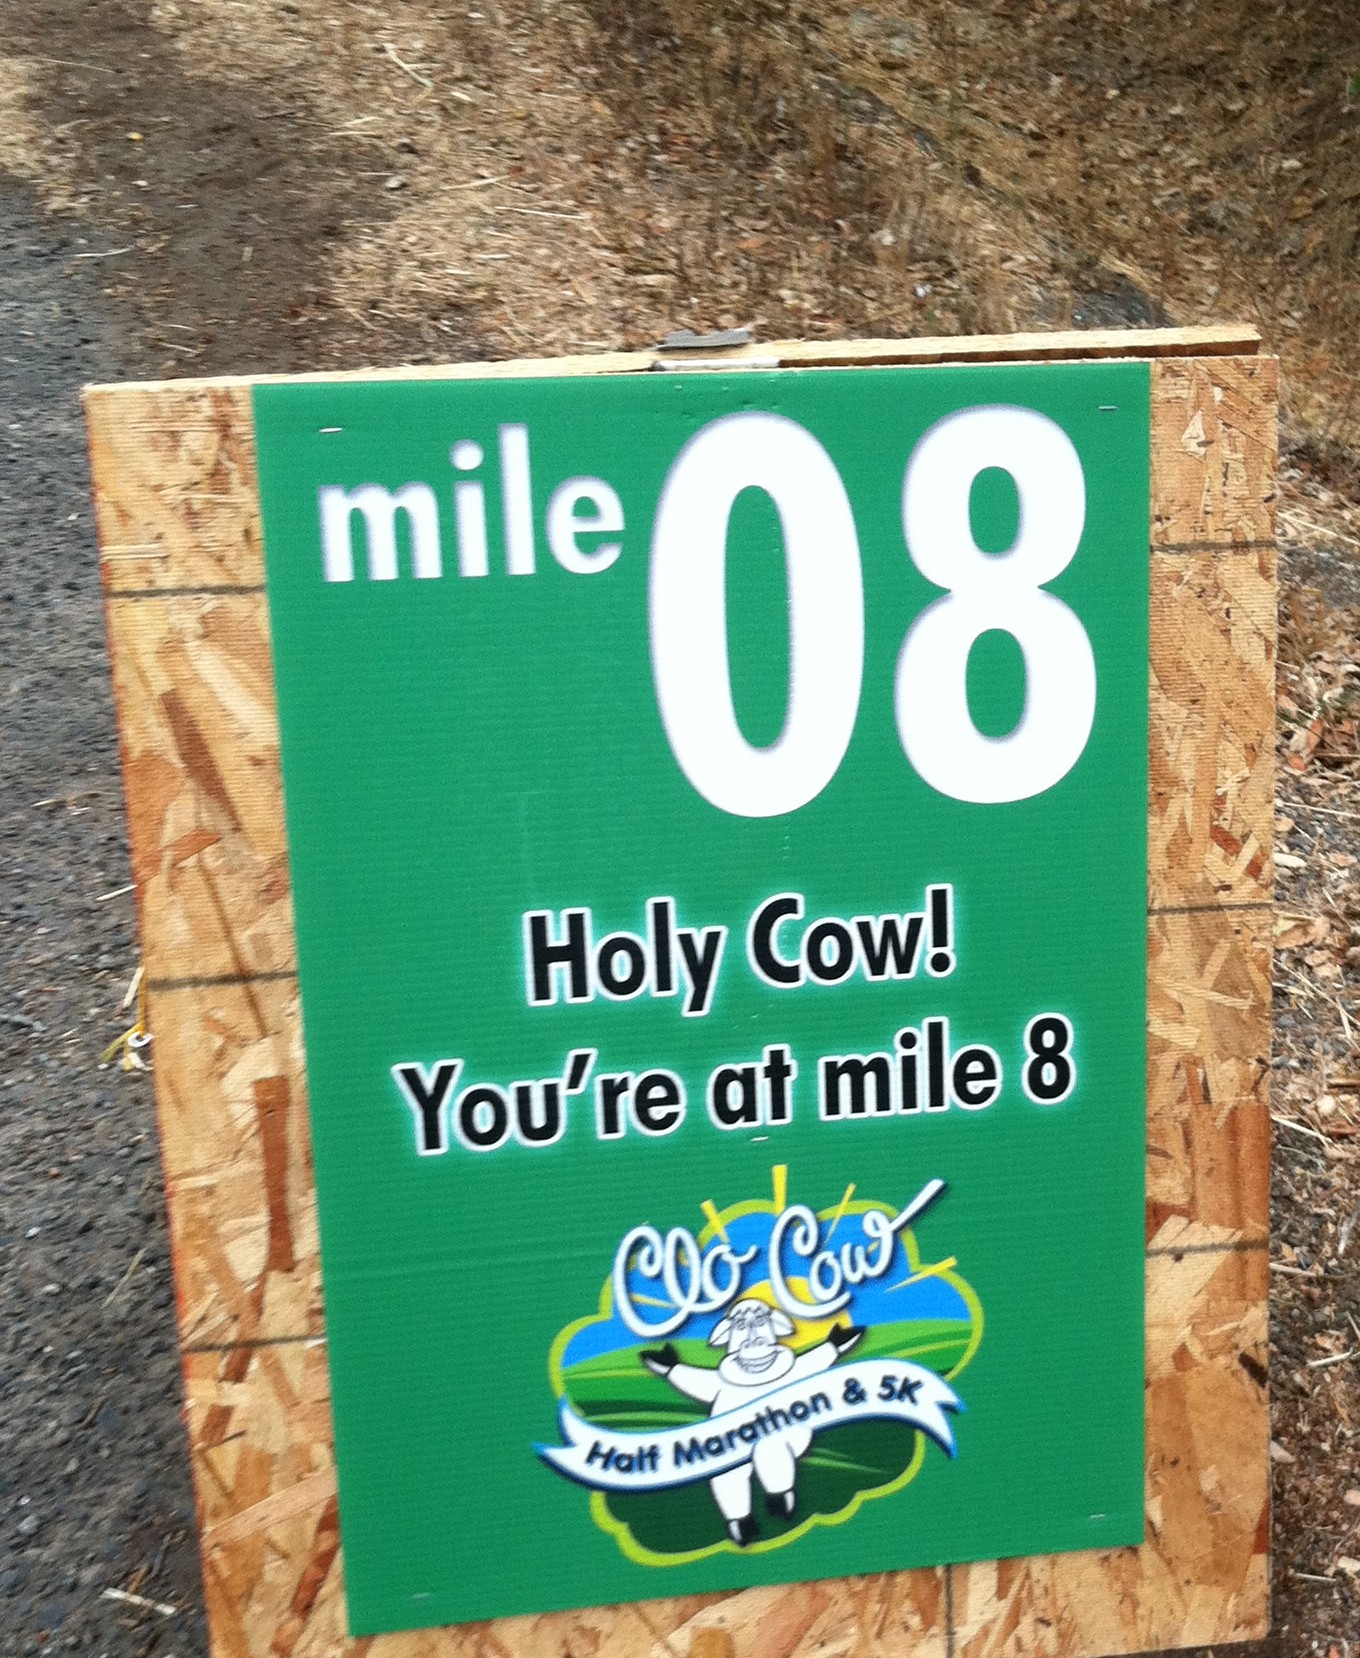 "Holy Cow! You're at Mile Marker 08" - encouraging mile marker at the Petaluma Clo-Cow Half Marathon 2012